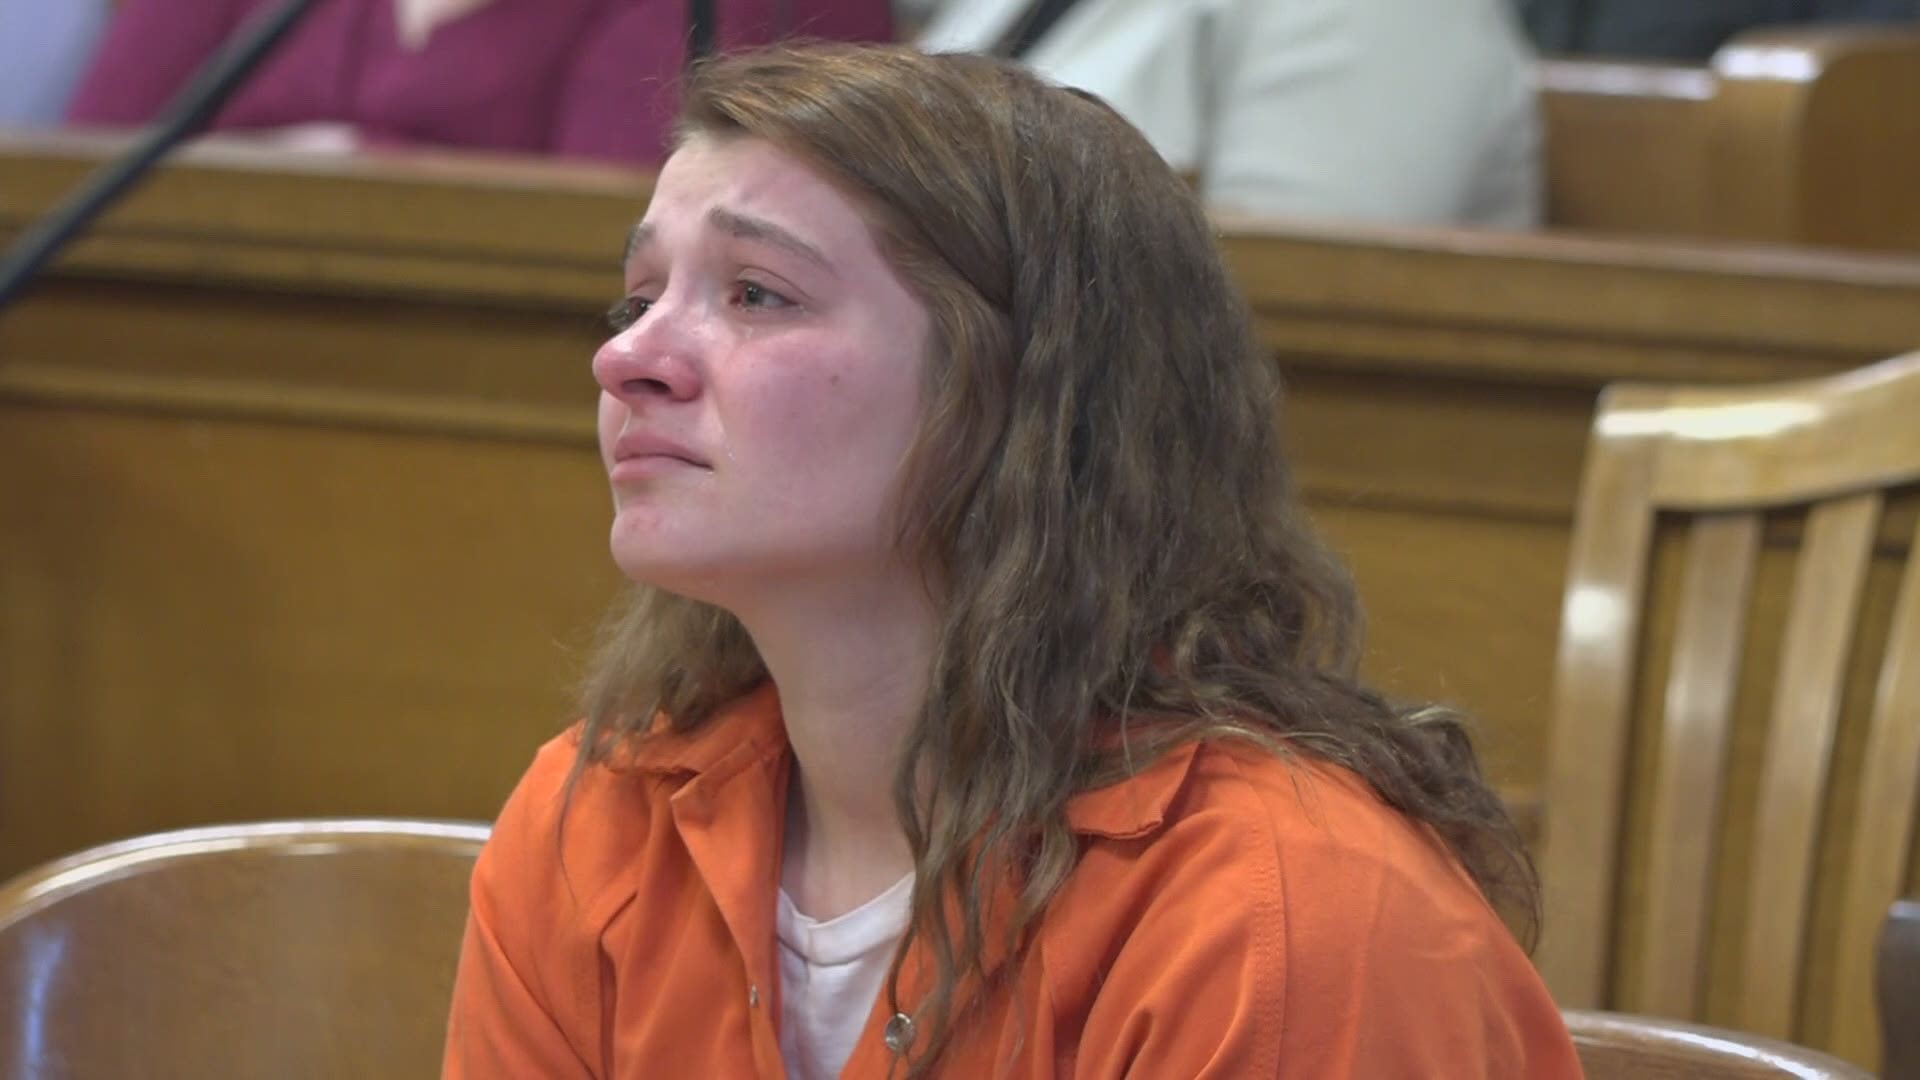 Bucksport woman pleads guilty to manslaughter for death of 2-year-old girl, sentenced to 10 years